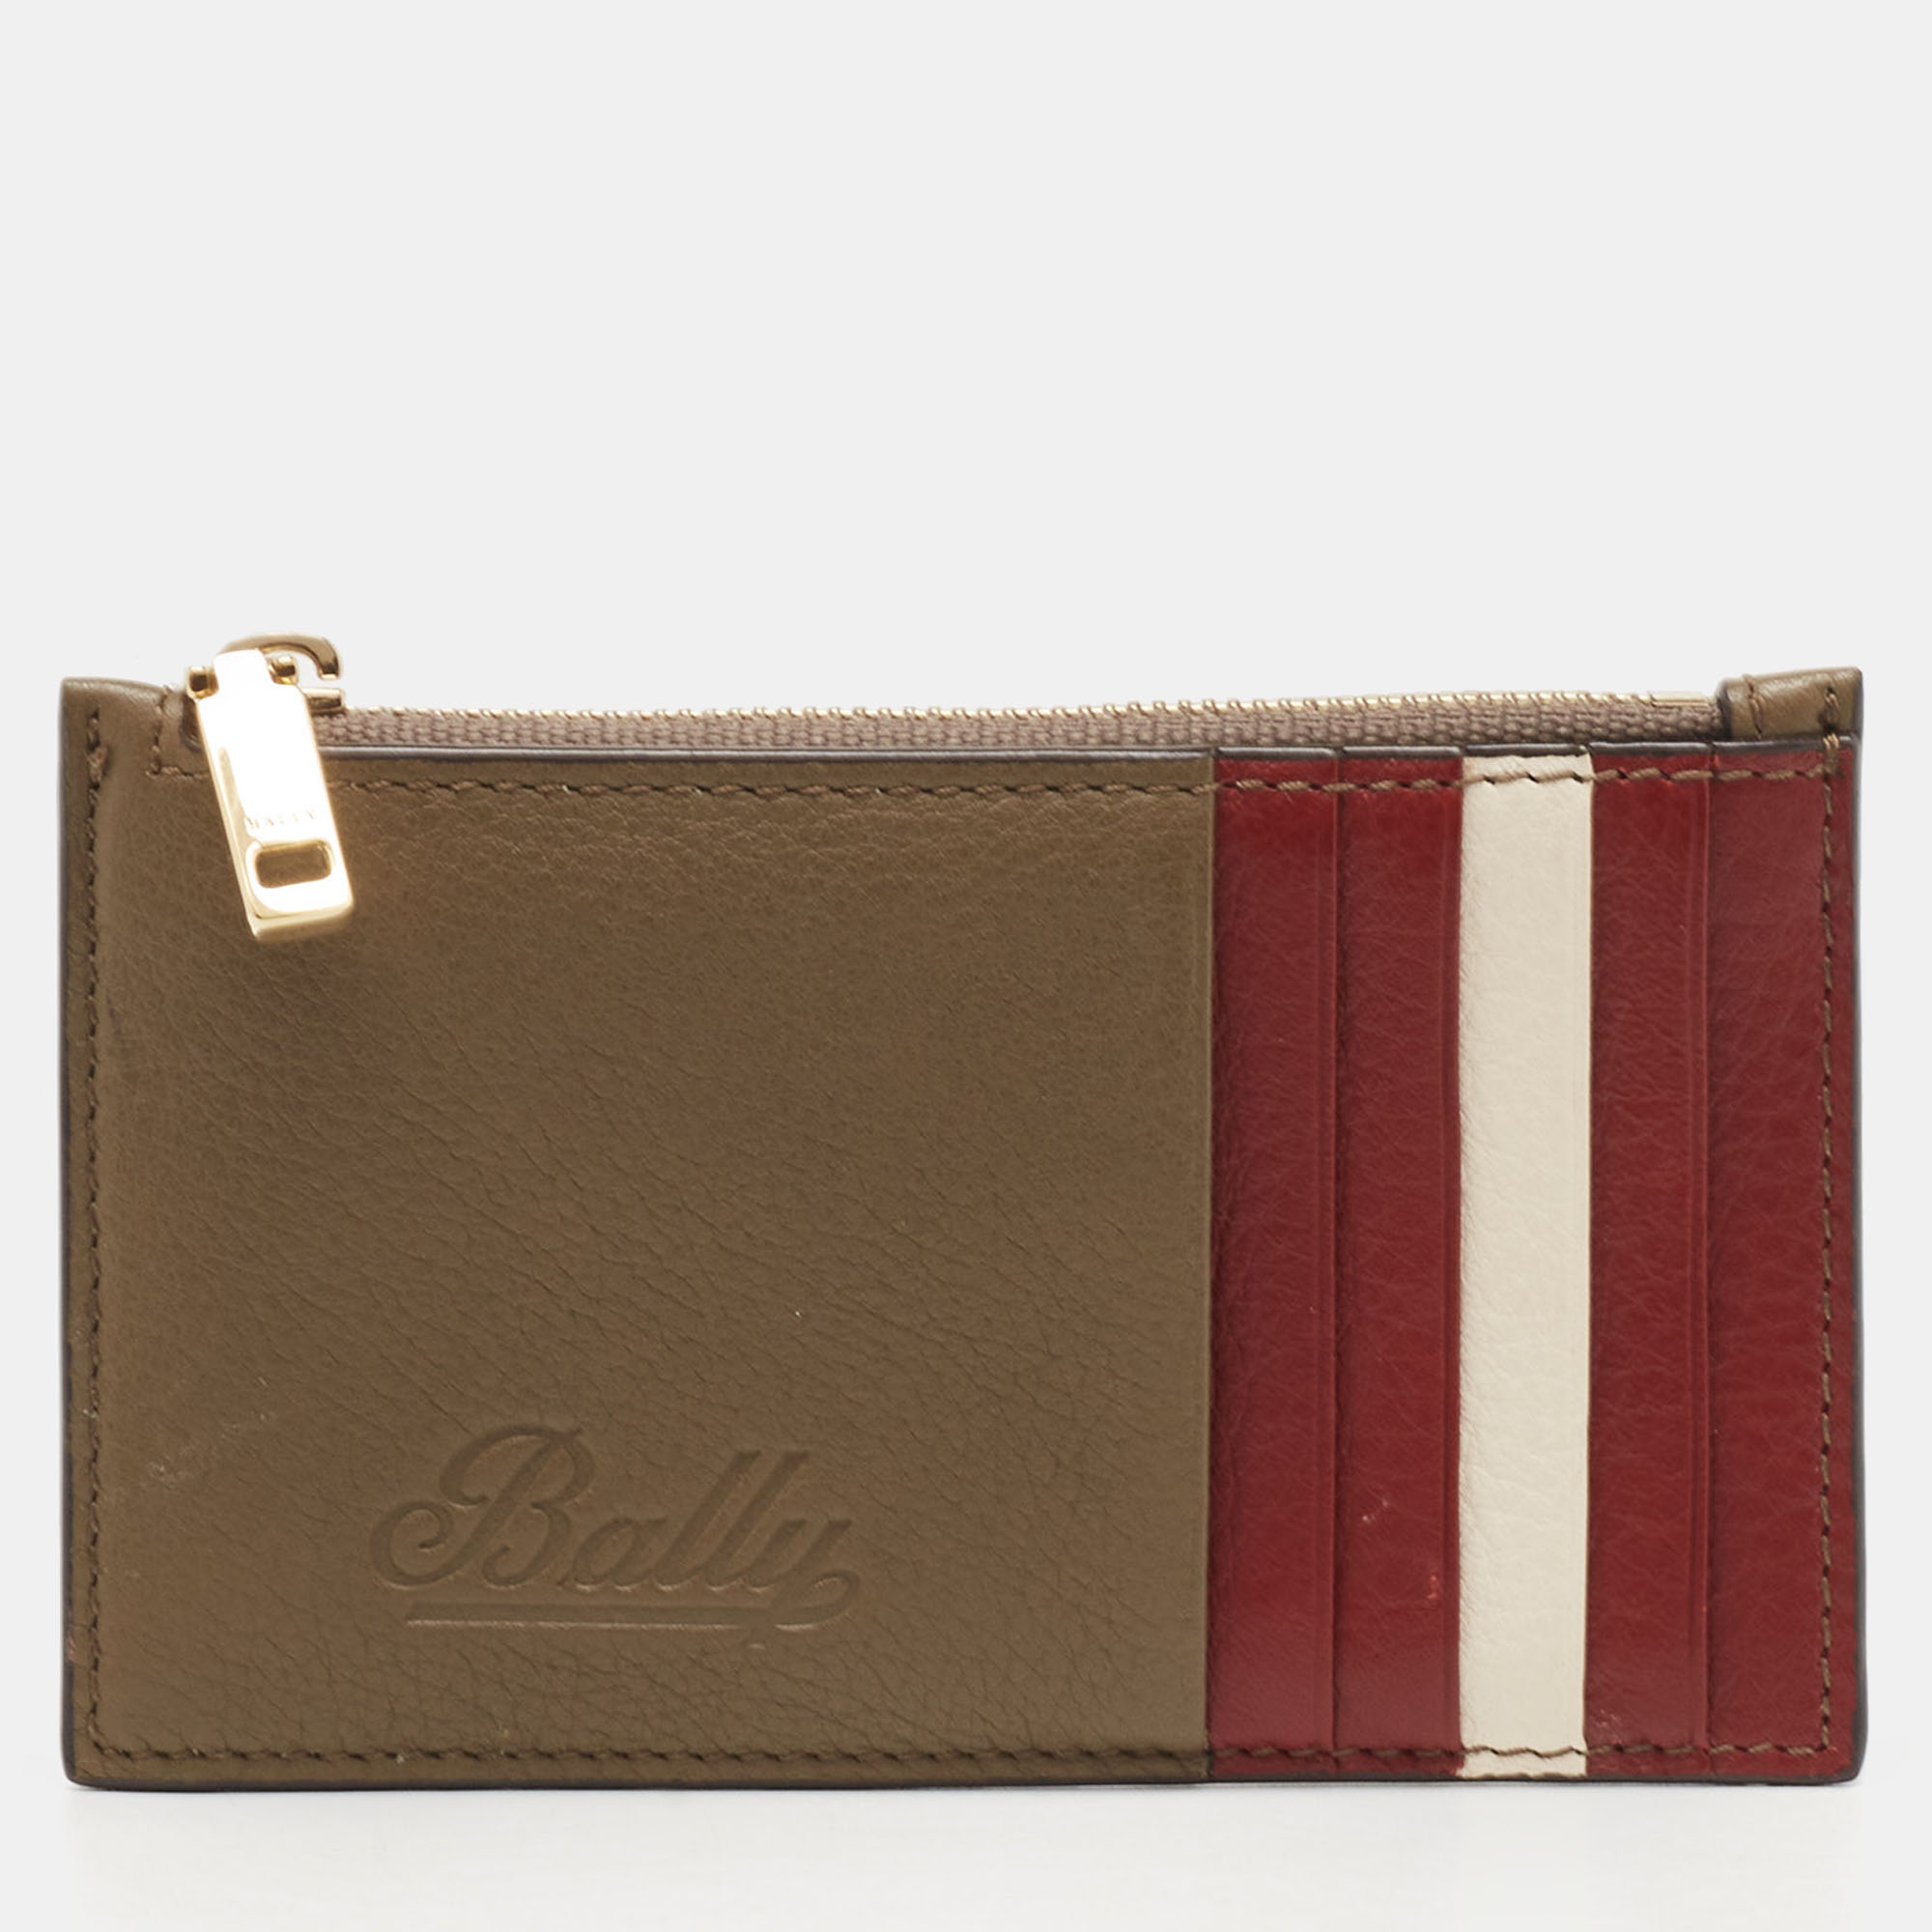 

Bally Tricolor Leather Zip Card Holder, Multicolor